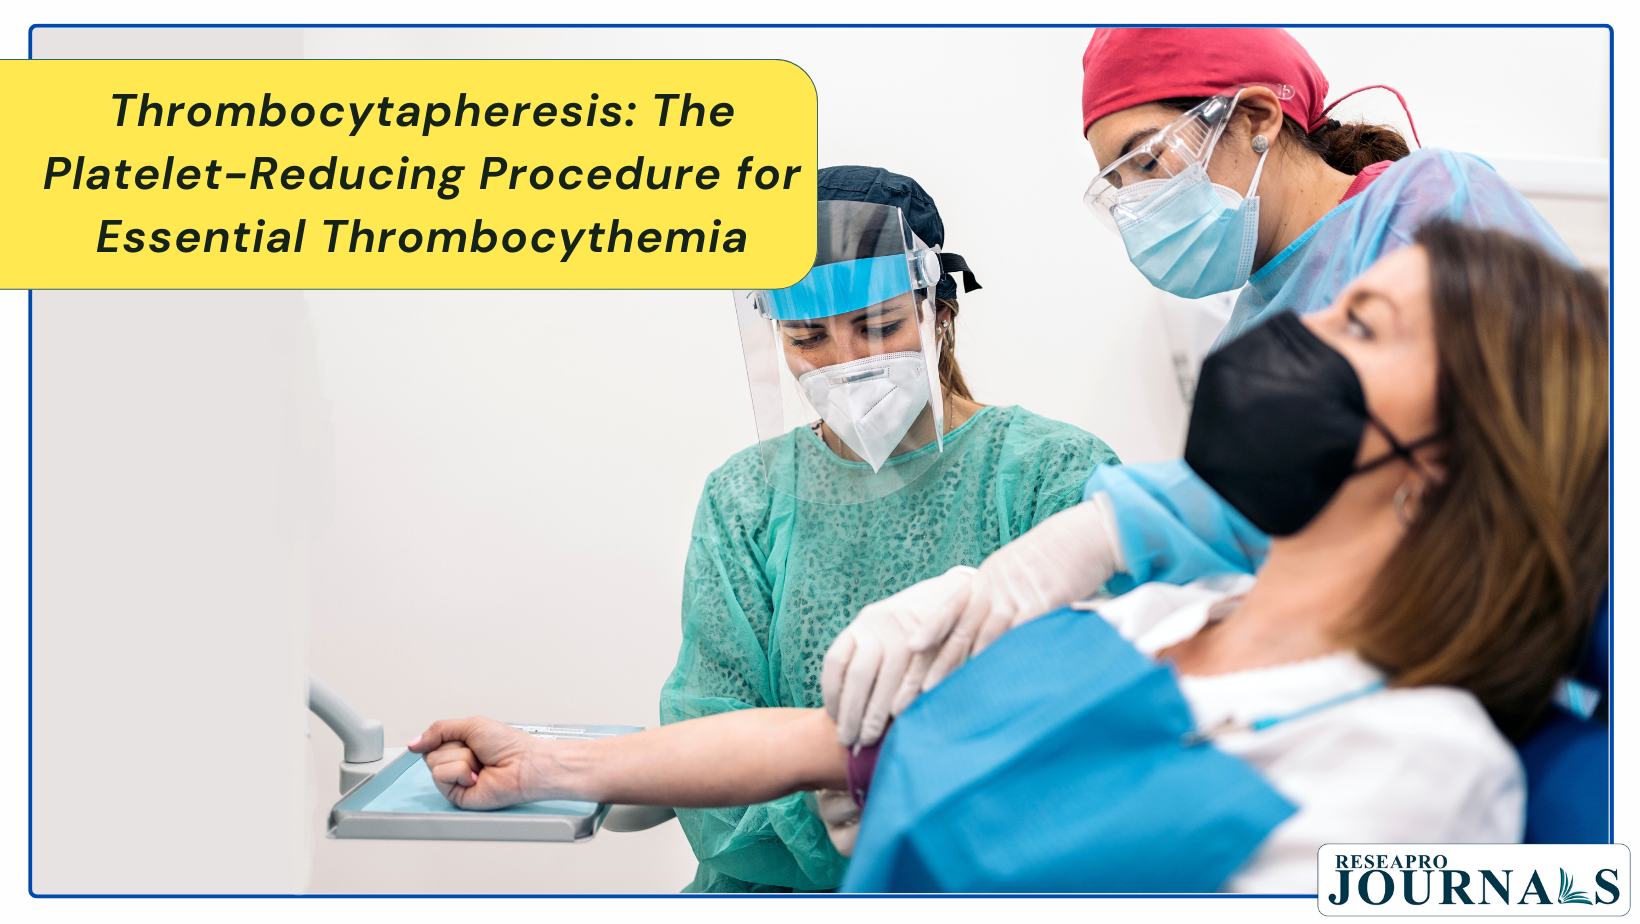 Thrombocytapheresis: The Platelet-Reducing Procedure for Essential Thrombocythemia